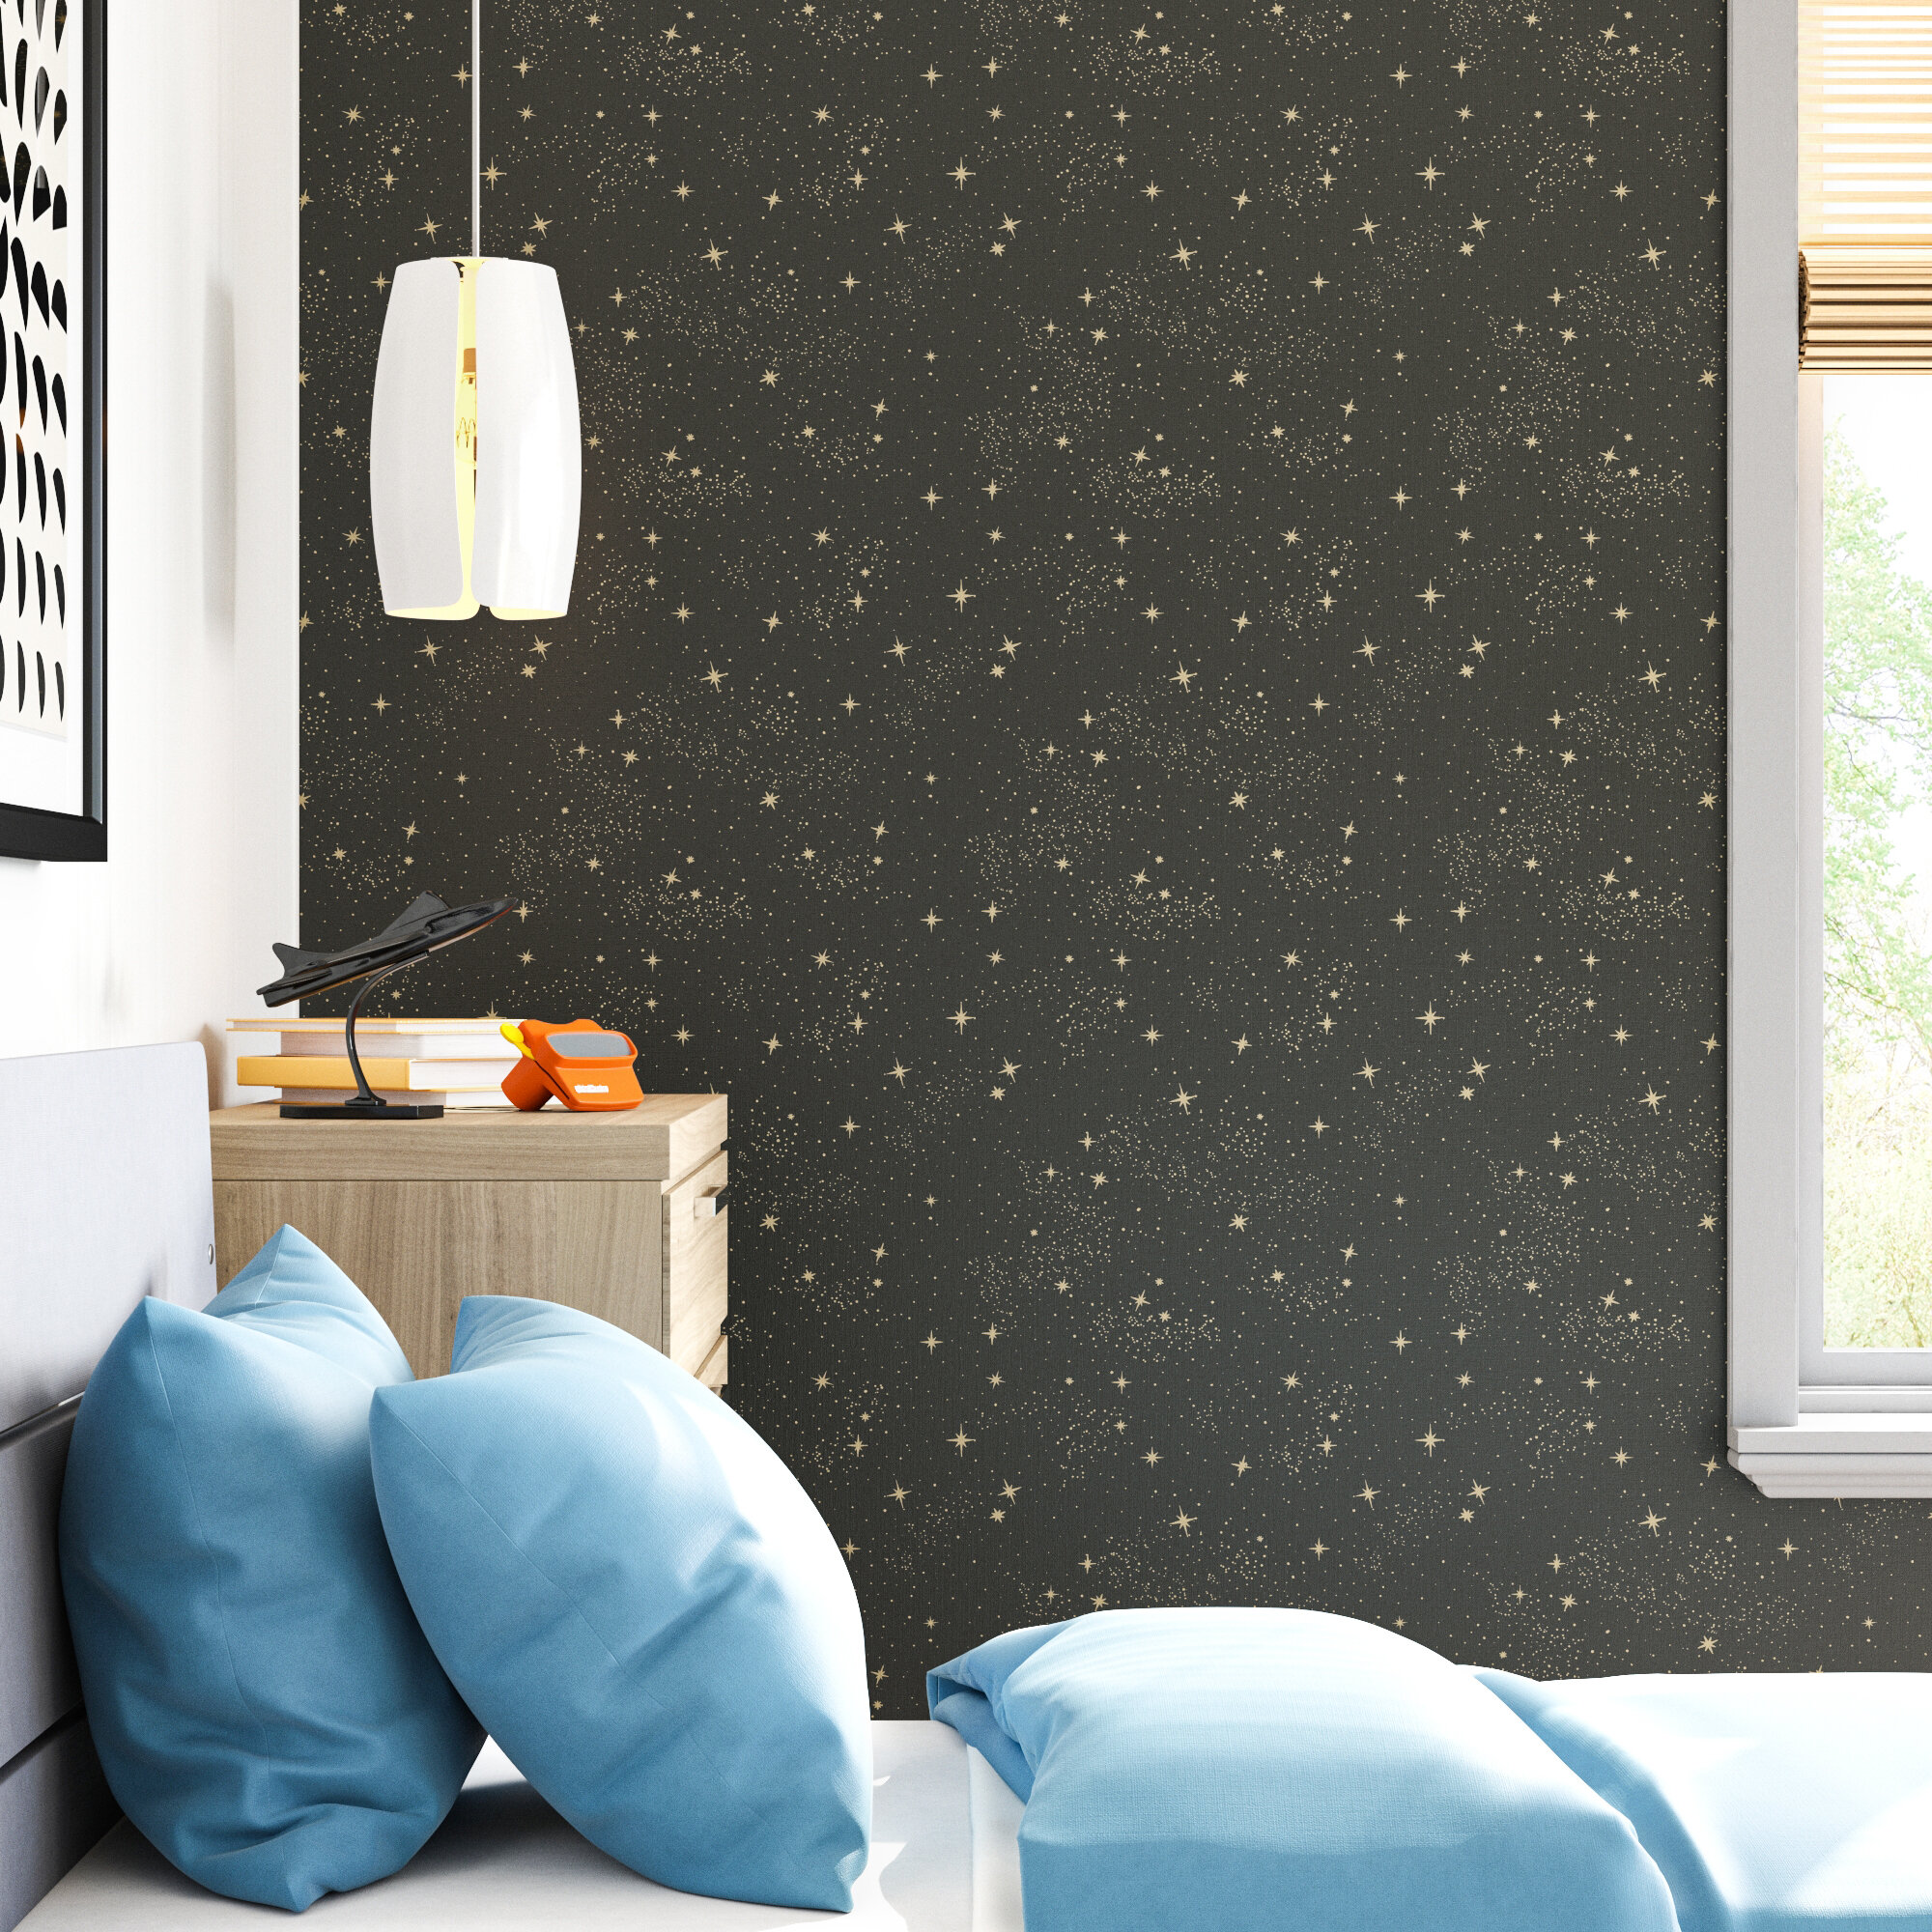 New Peel and Stick Wallpaper | Removable & Easy To Install